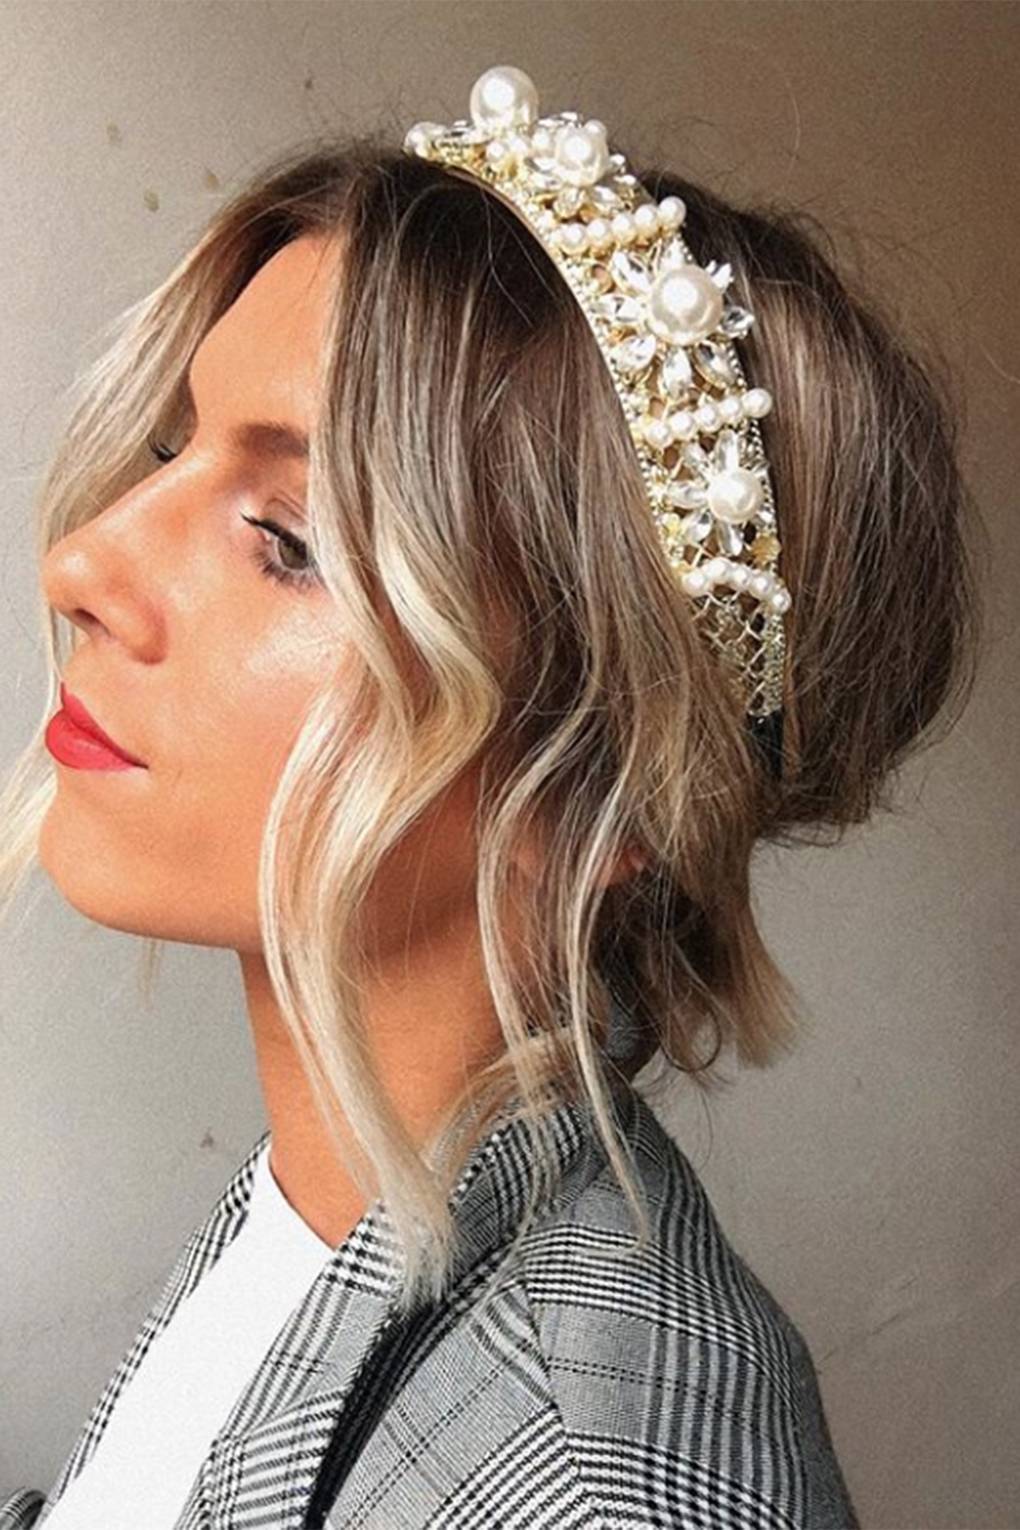 Hairstyles 2019 Hair Ideas Cut And Colour Inspiration